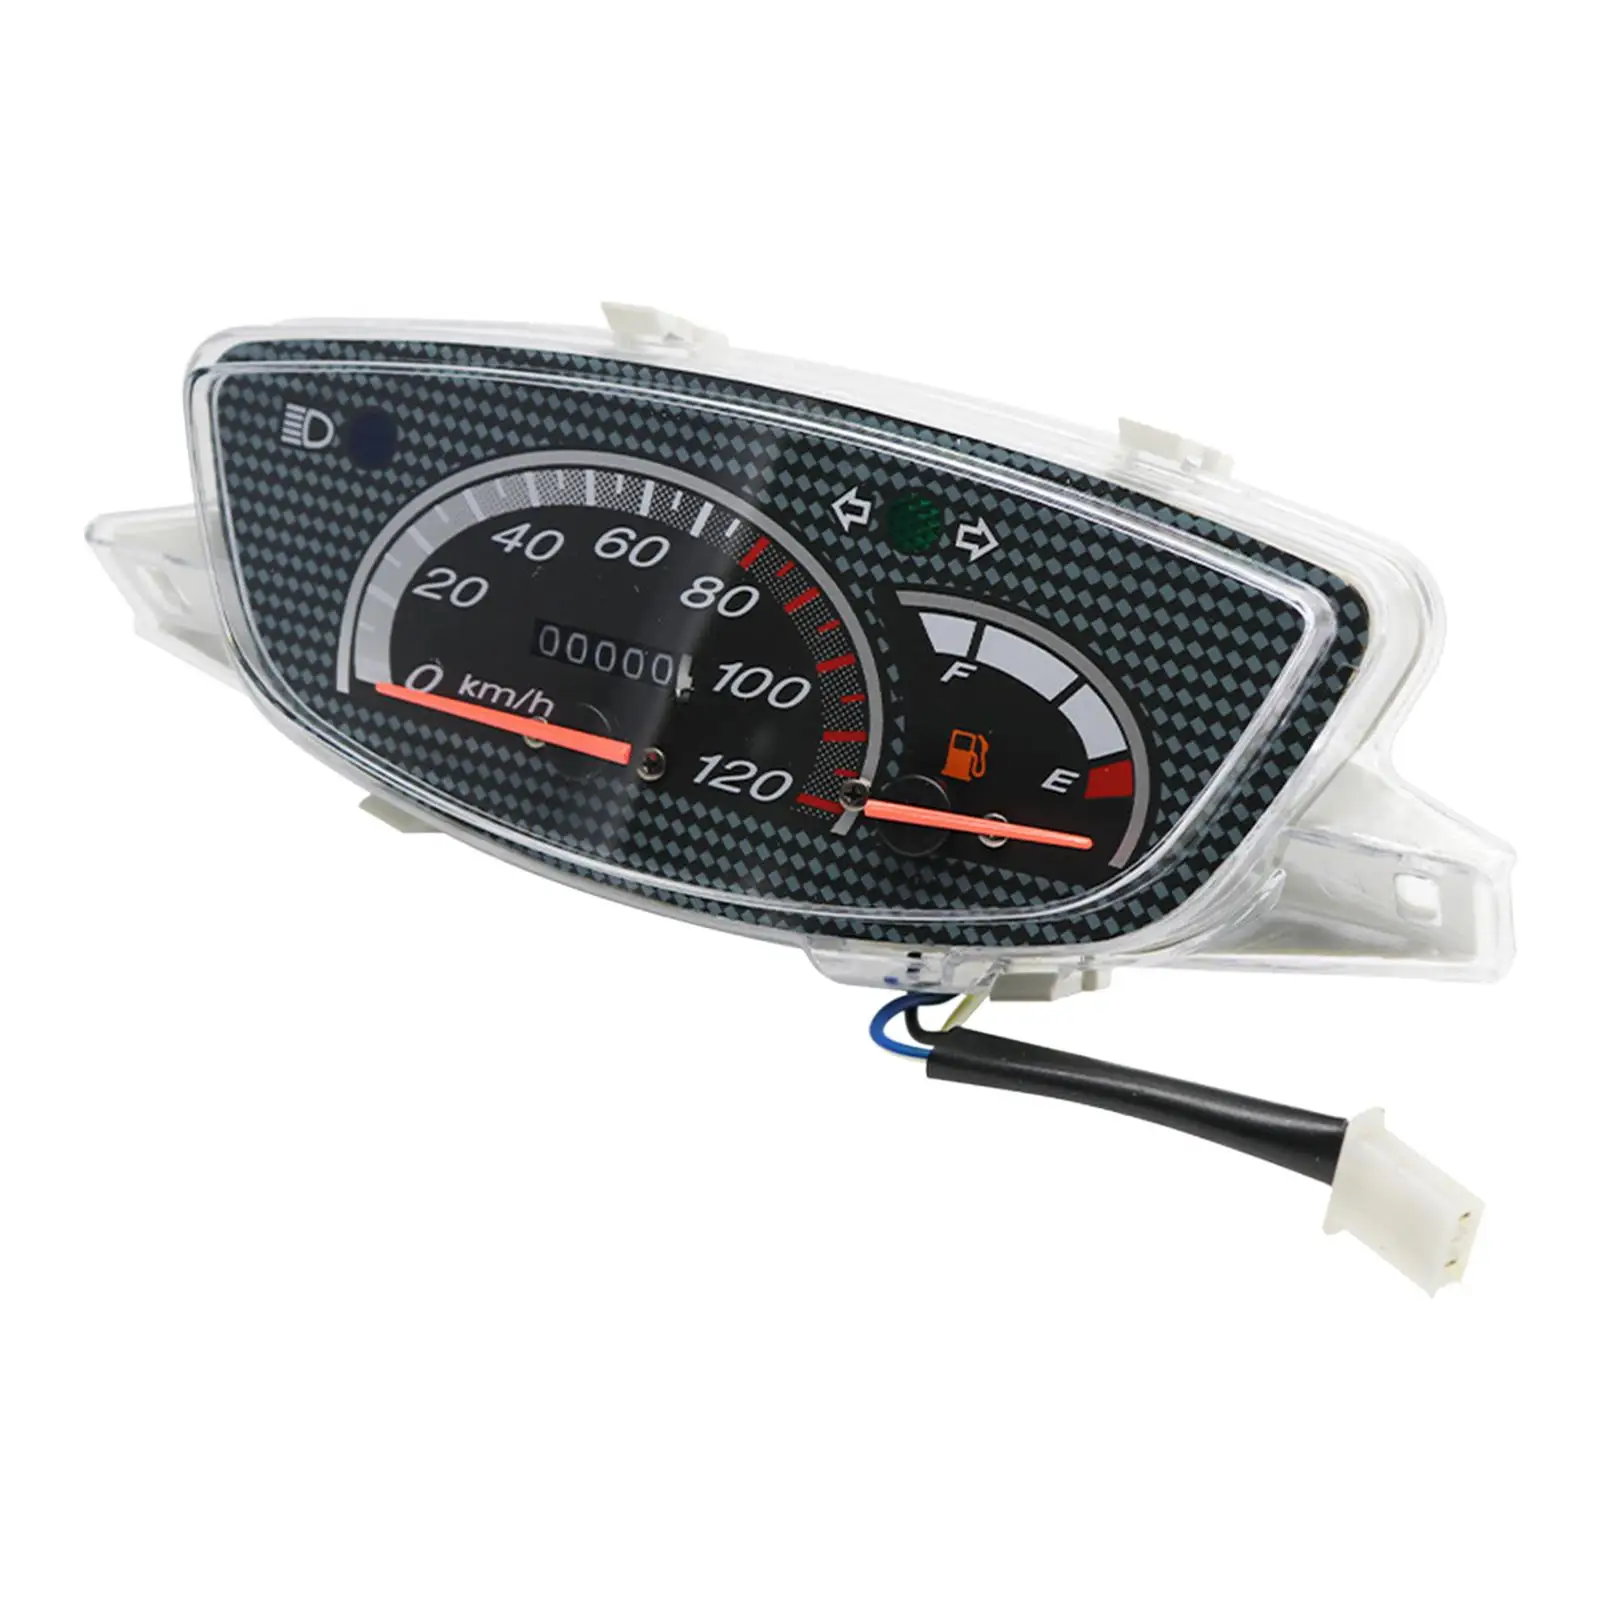  Motorcycle Speedometer, Motorbikes Instrument ,Accessories Black Replacement Odometer for Diozx AF34/ Parts Supplies